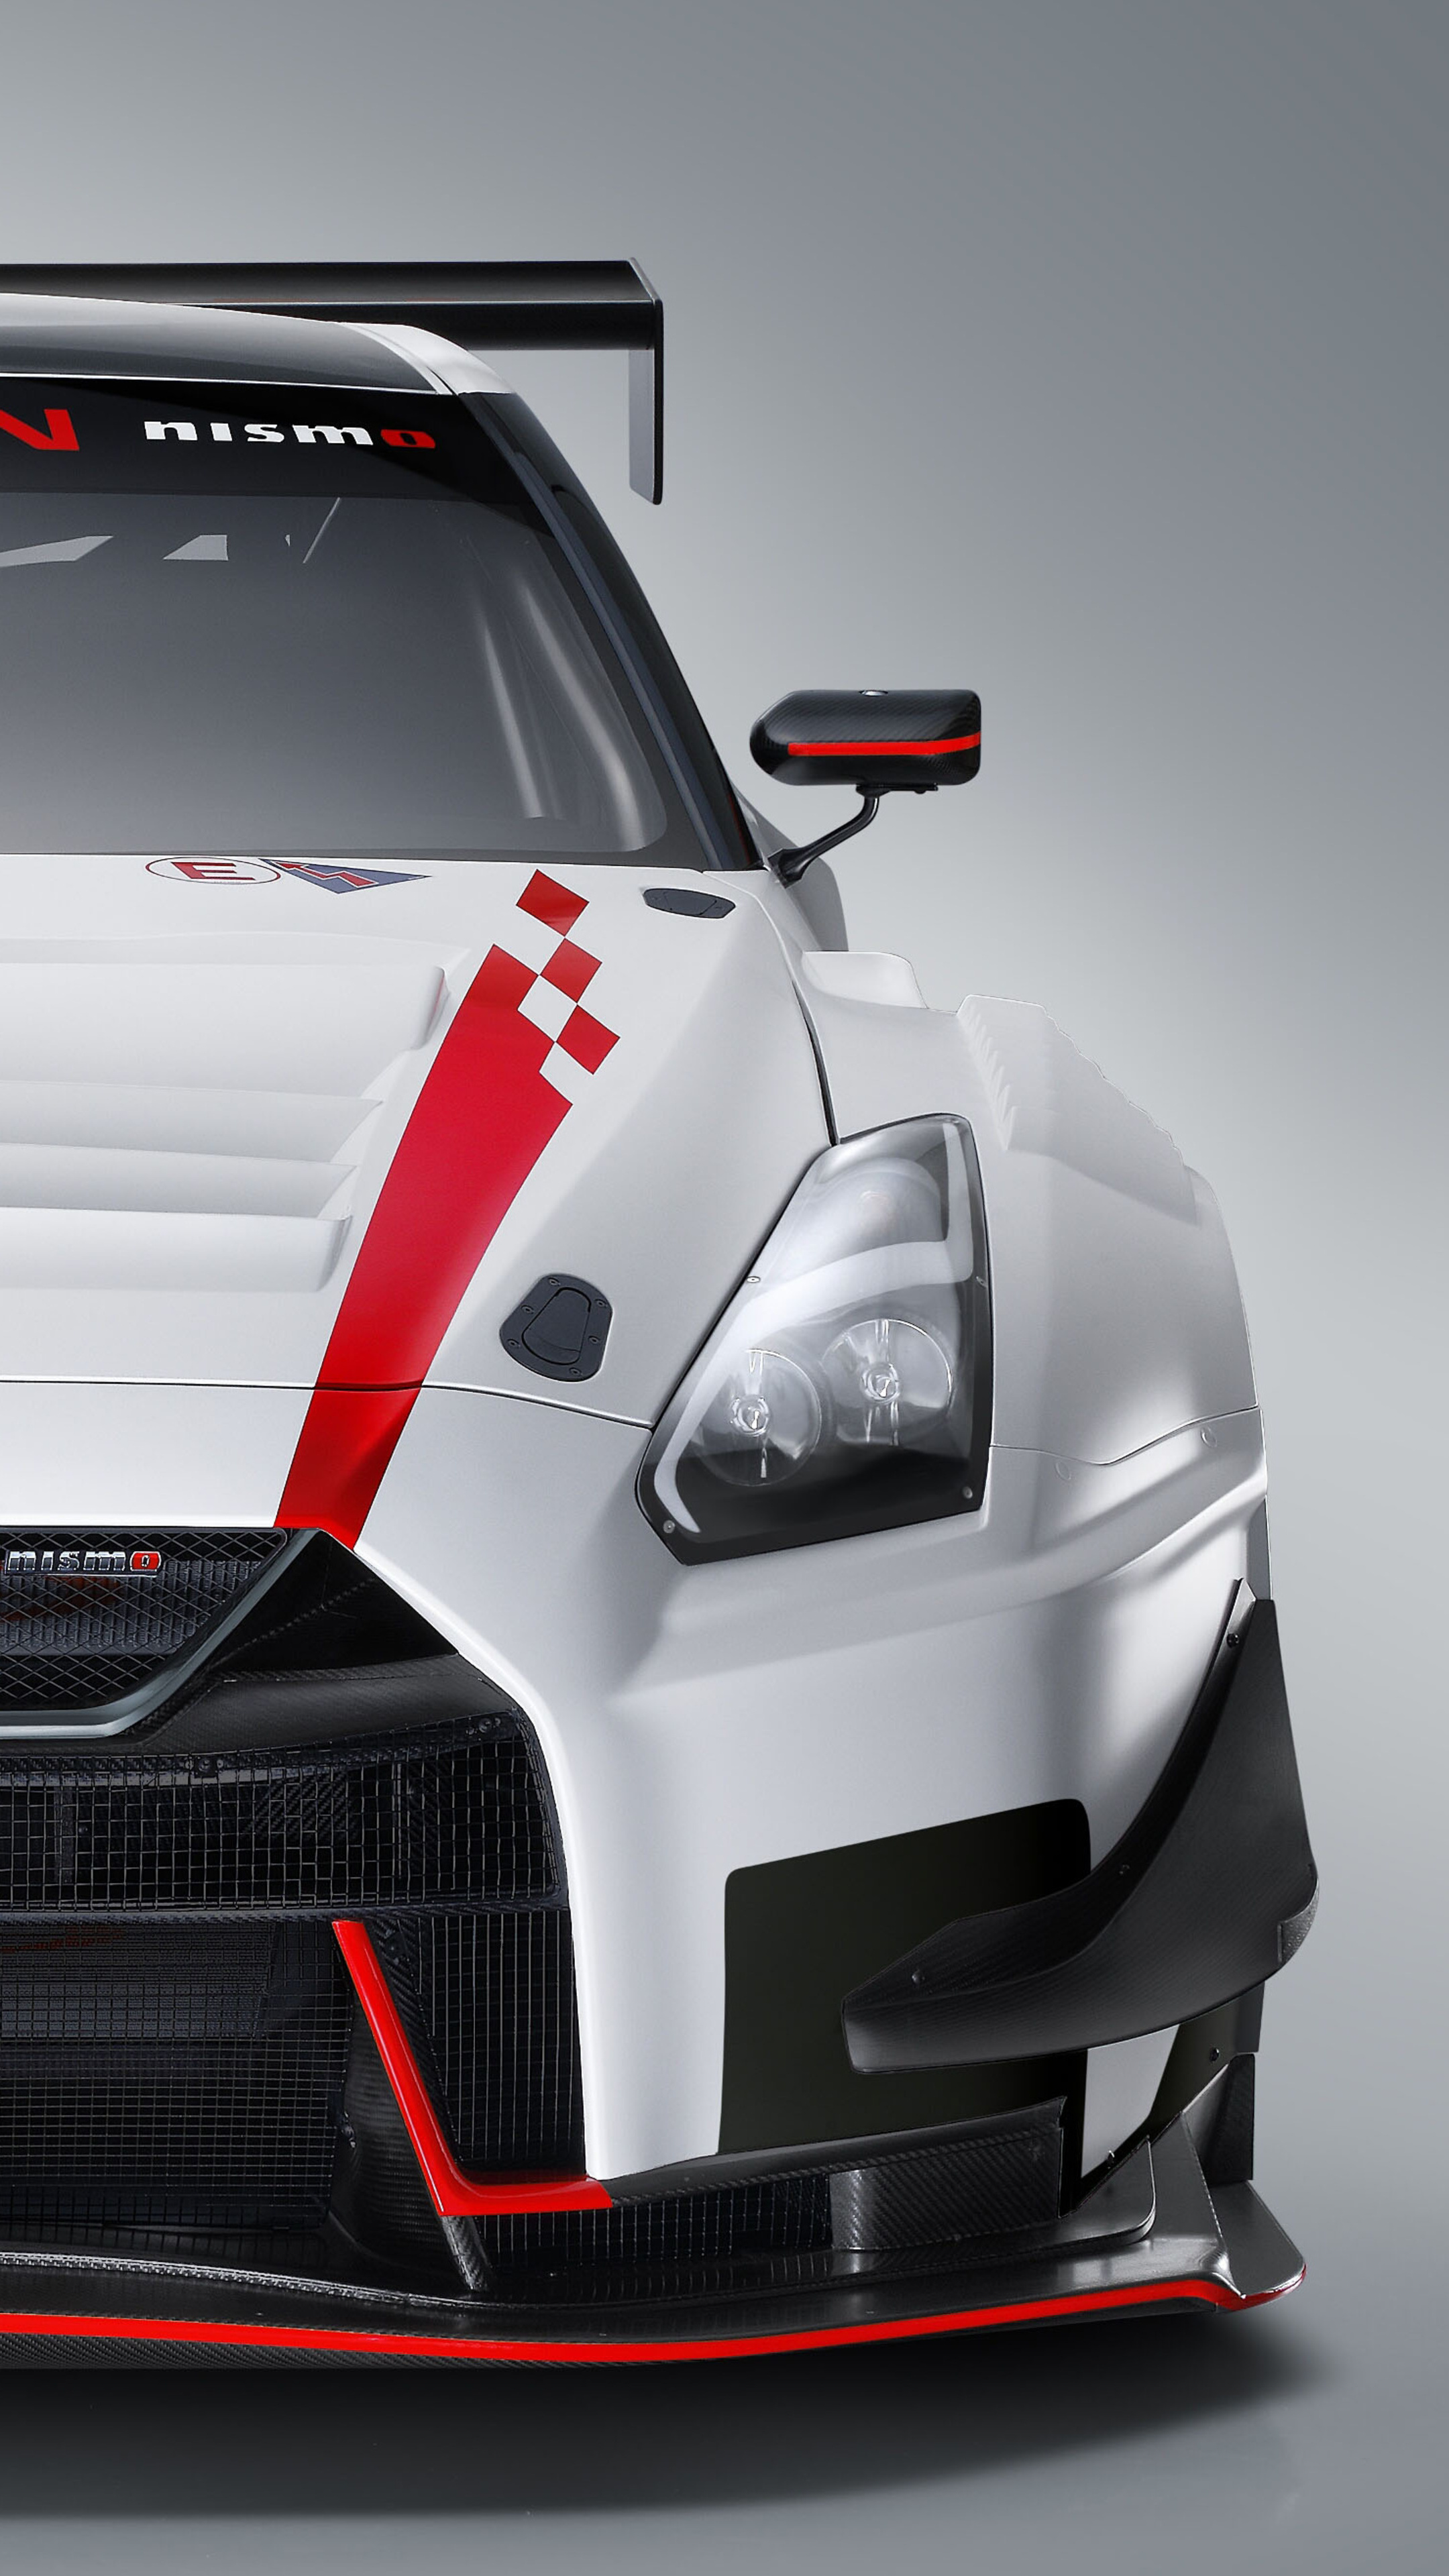 Nissan GT-R, NISMO GT3 edition, Sony Xperia exclusive, Thrilling sports car, 2160x3840 4K Handy